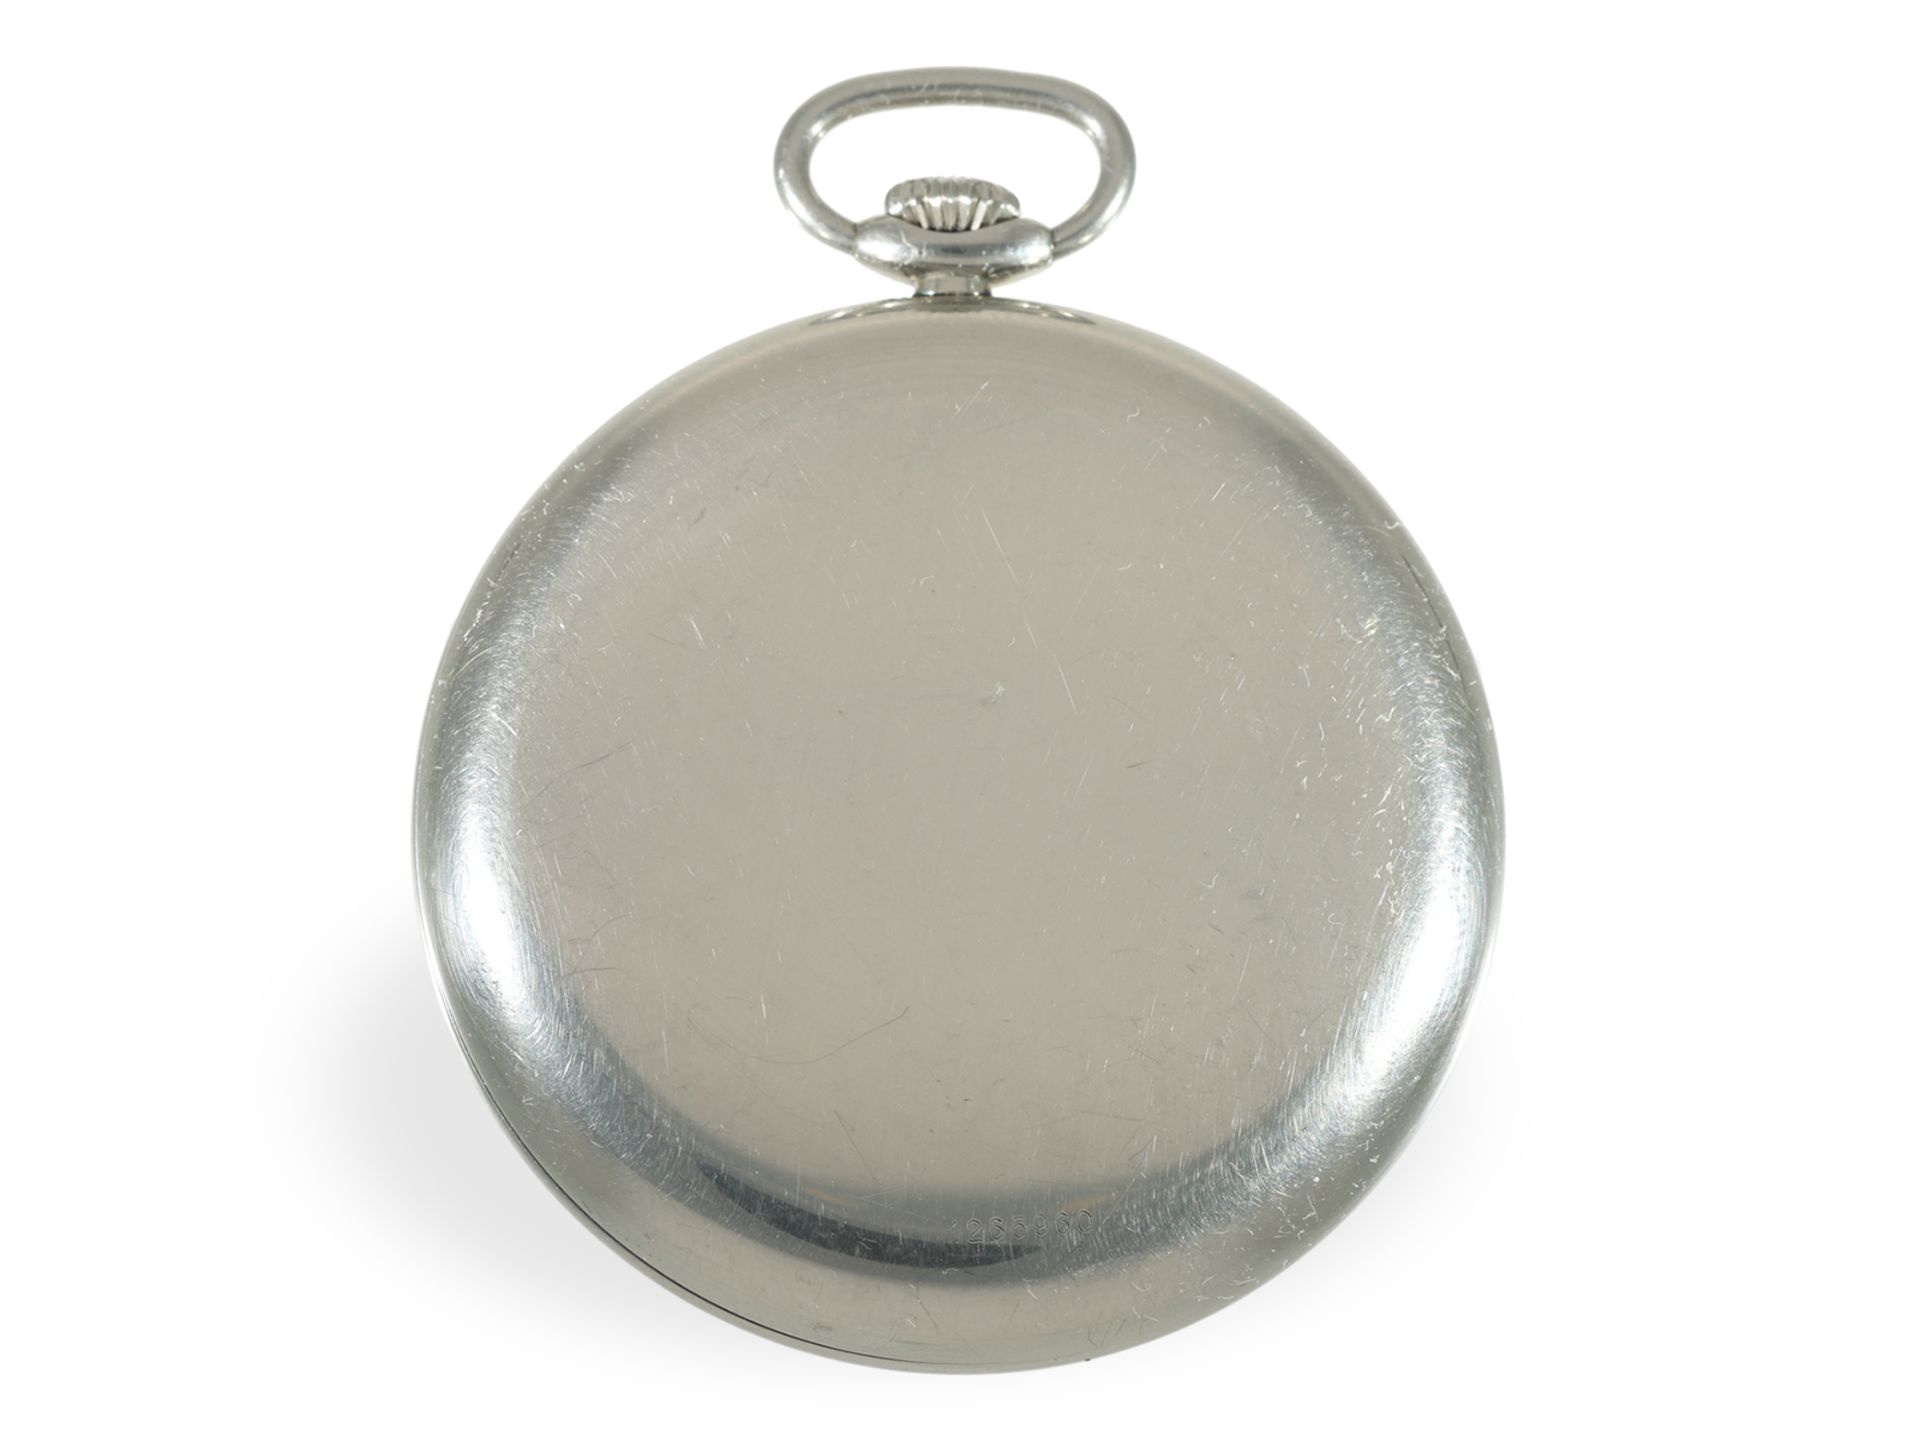 Pocket watch: IWC steel dress watch, reference 5301, calibre 972, 1970s - Image 5 of 5